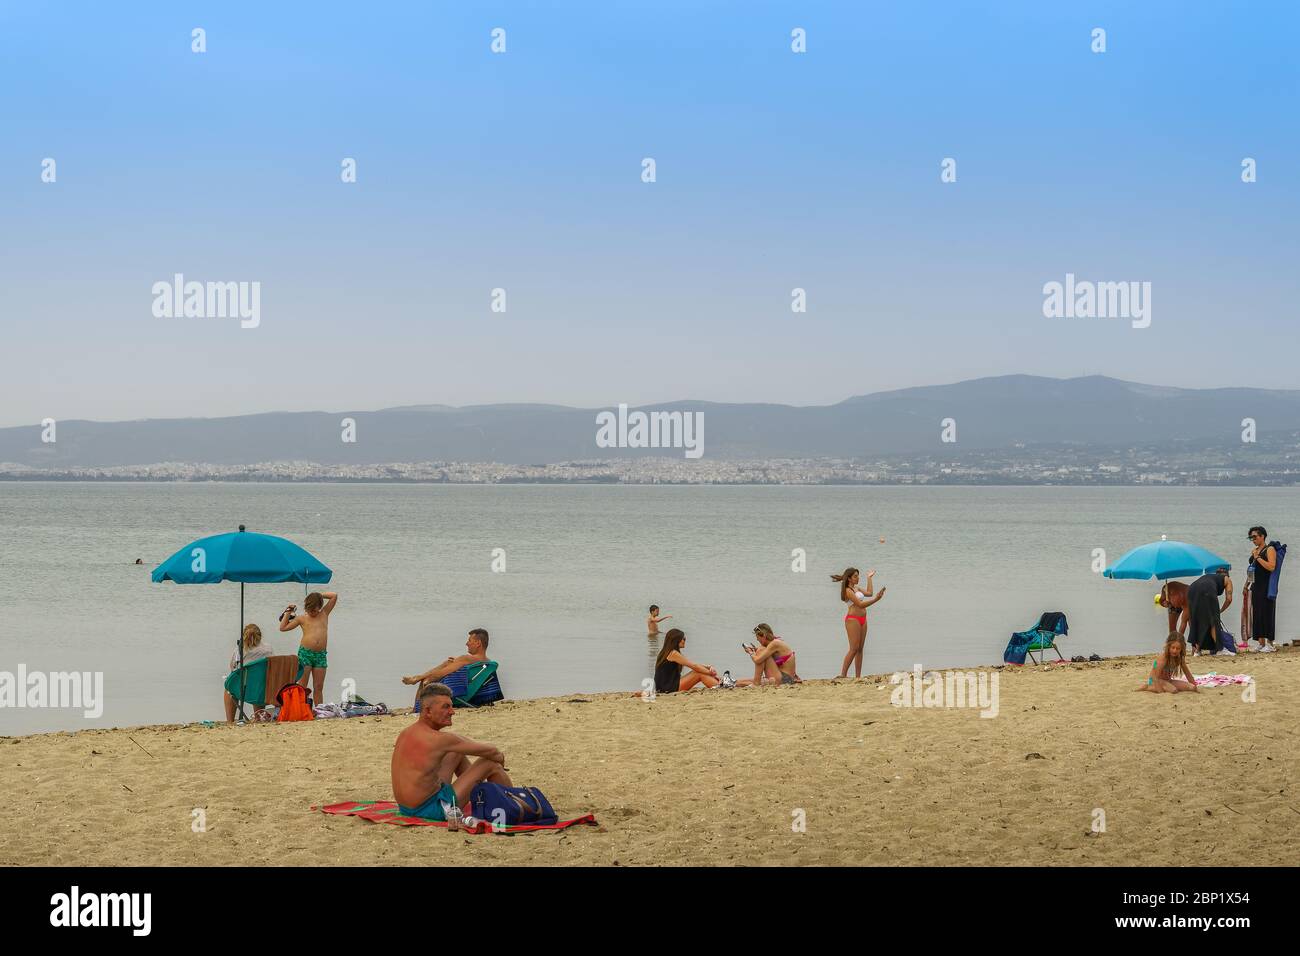 Neoi Epivates, Greece - May 16 2020: Public beaches open for the summer season. Bathers with sun umbrellas on sand by the sea at Thessaloniki suburbs, after government suggests people keep a distance. Stock Photo